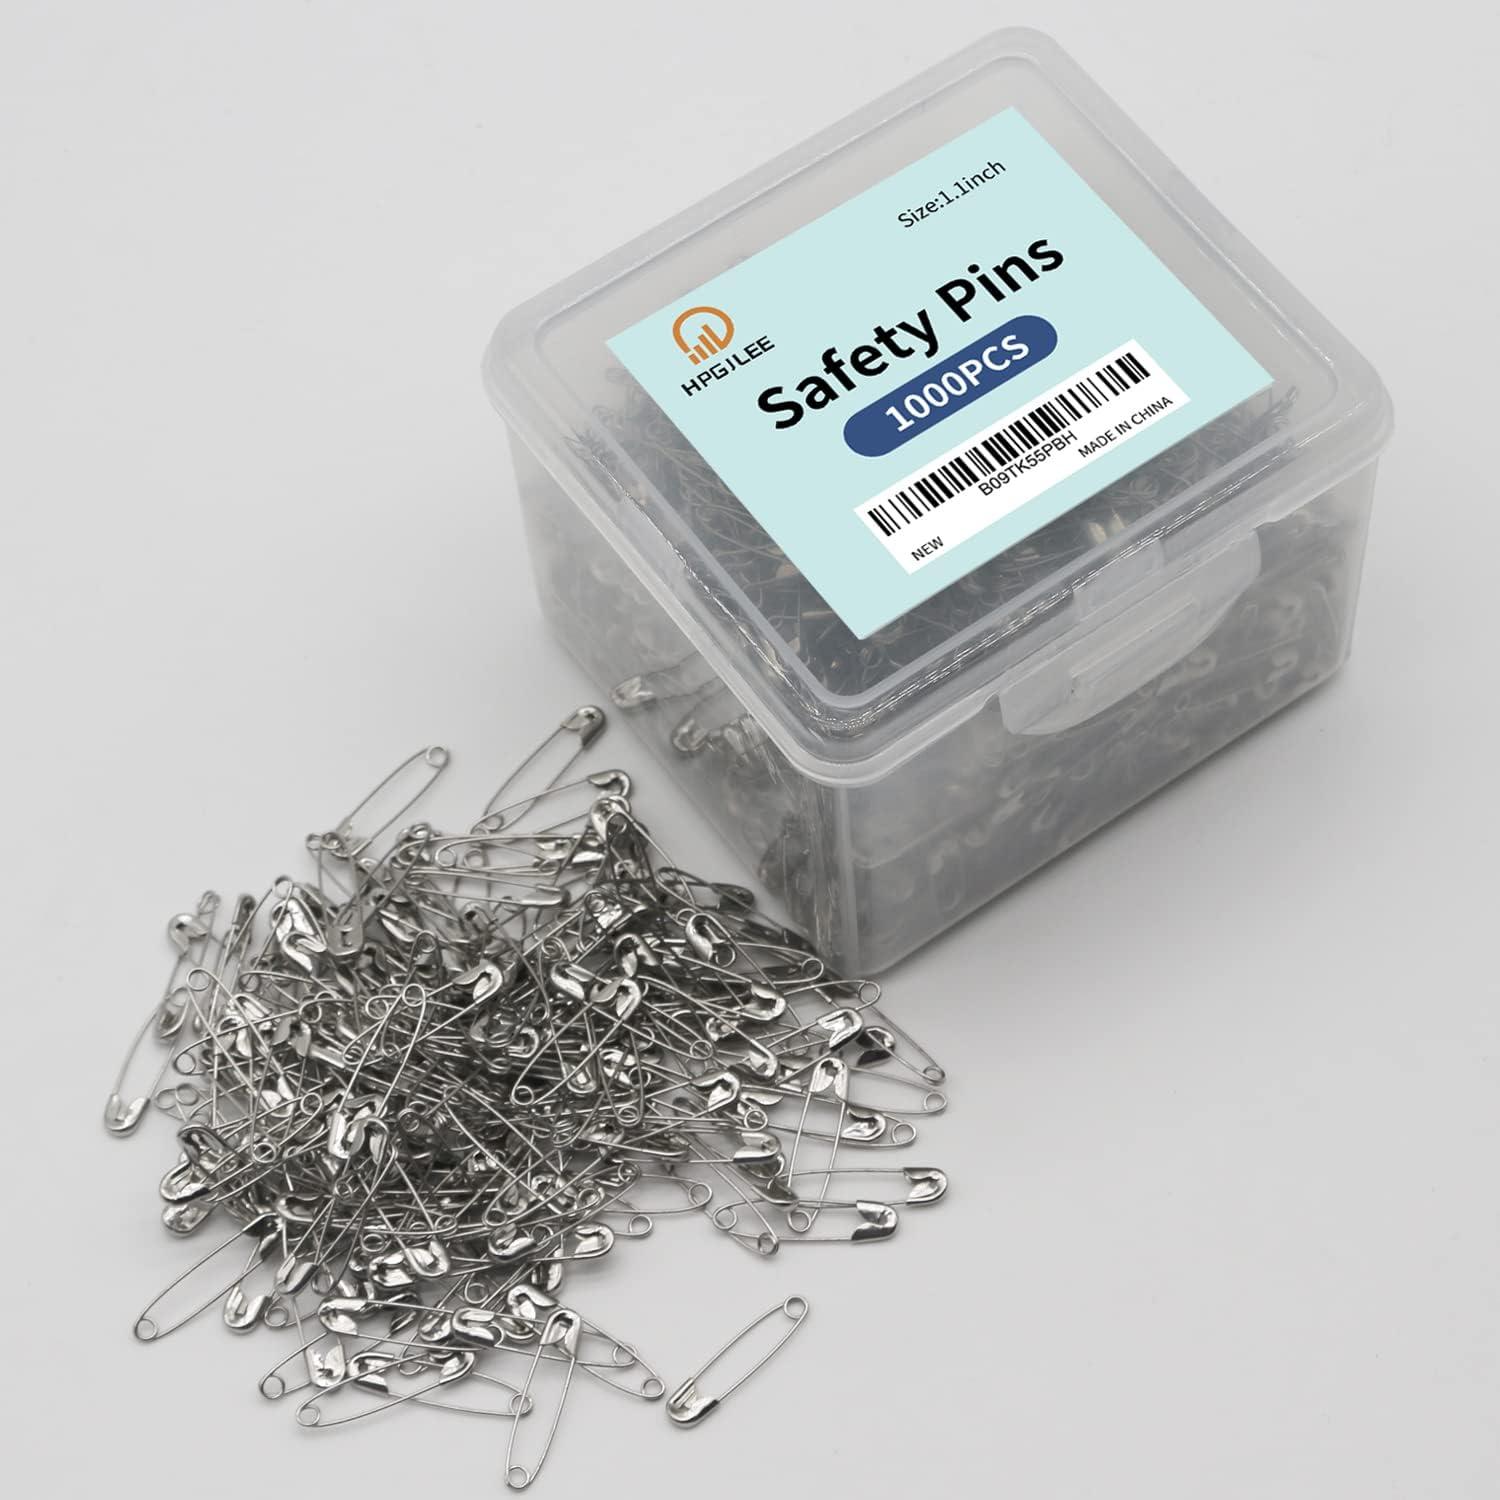 1000Pcs Safety Pins 1.1 Inch Rust-Resistant Steel Wire Silver Sewing Pins  Small Safety Pins Bulk for Clothes Crafts Home Office Use 1.1 inch 1000PCS